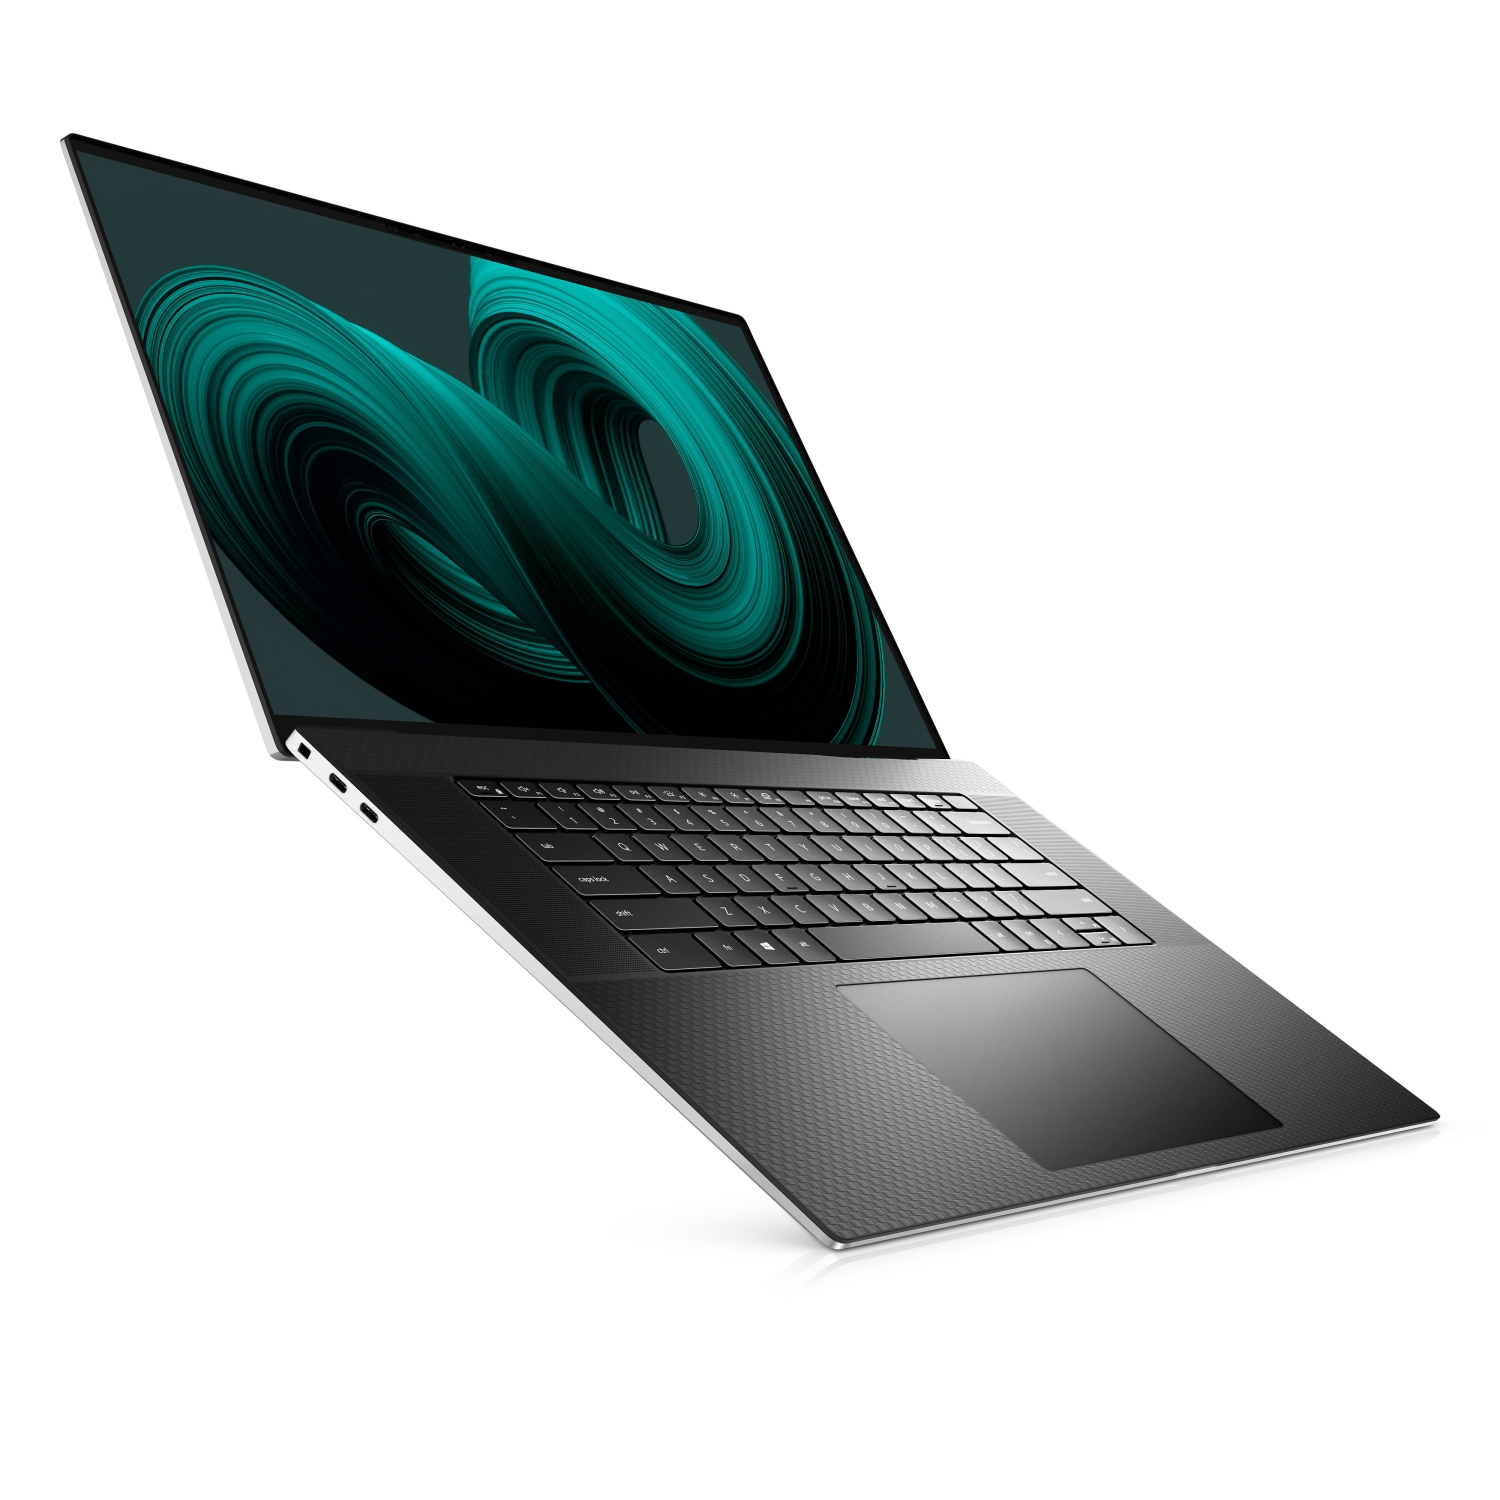 Refurbished (Excellent) - Dell XPS 17 9710 Laptop (2021) | 17" 4K Touch | Core i9 - 1TB SSD - 16GB RAM - RTX 3060 | 8 Cores @ 5 GHz - 11th Gen CPU Certified Refurbished